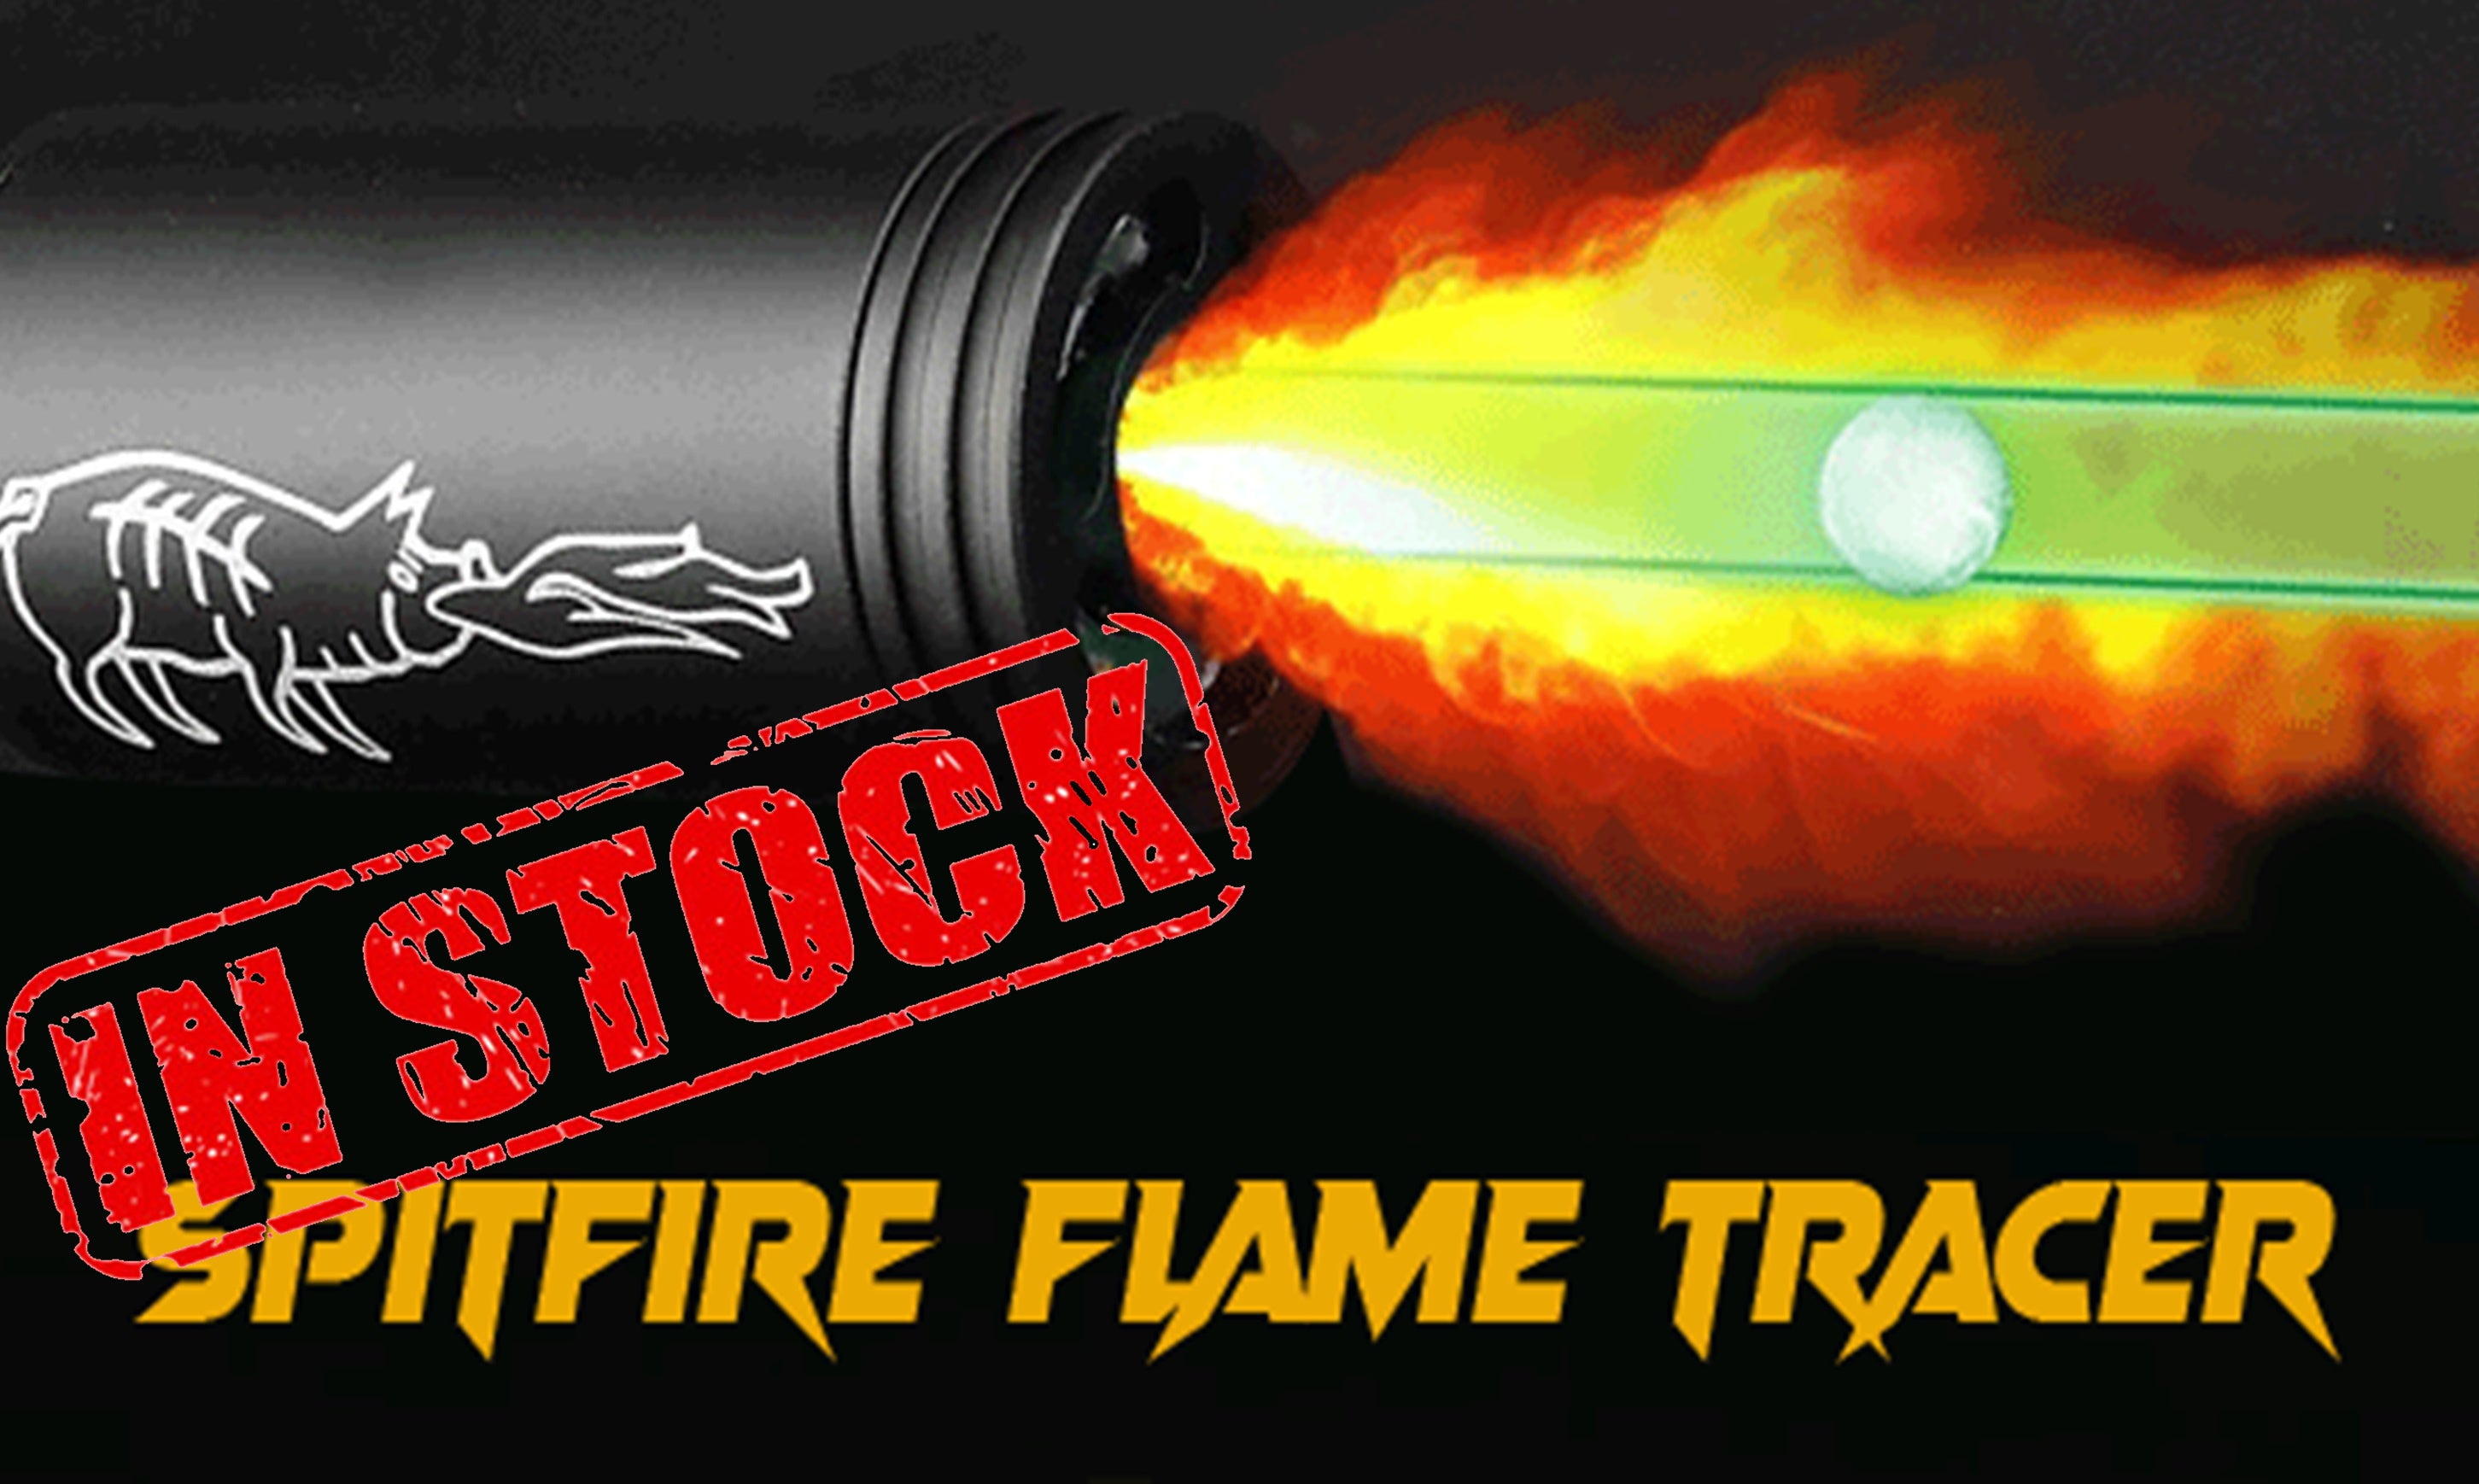 Our Favourite New Accessory - WoSport Spitfire Flame Tracer Review